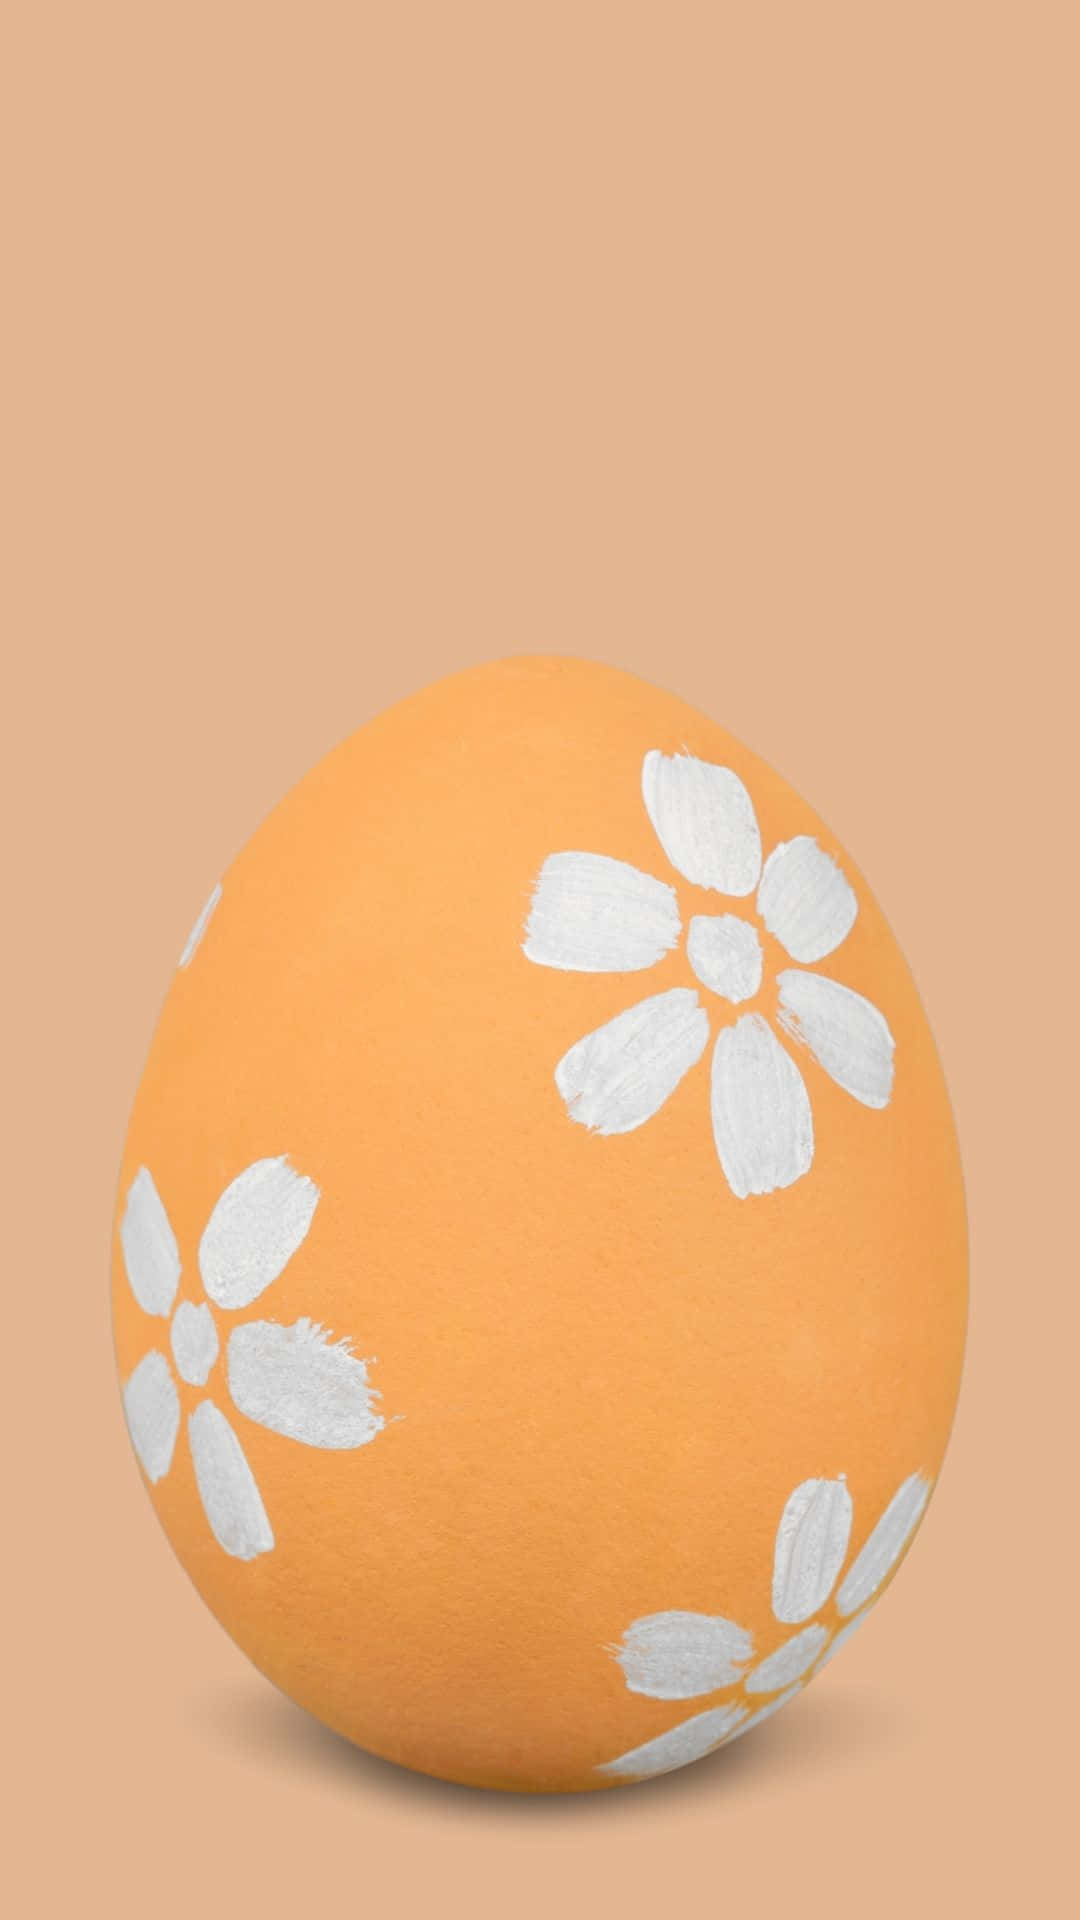 A Painted Orange Egg With White Flowers On It Wallpaper